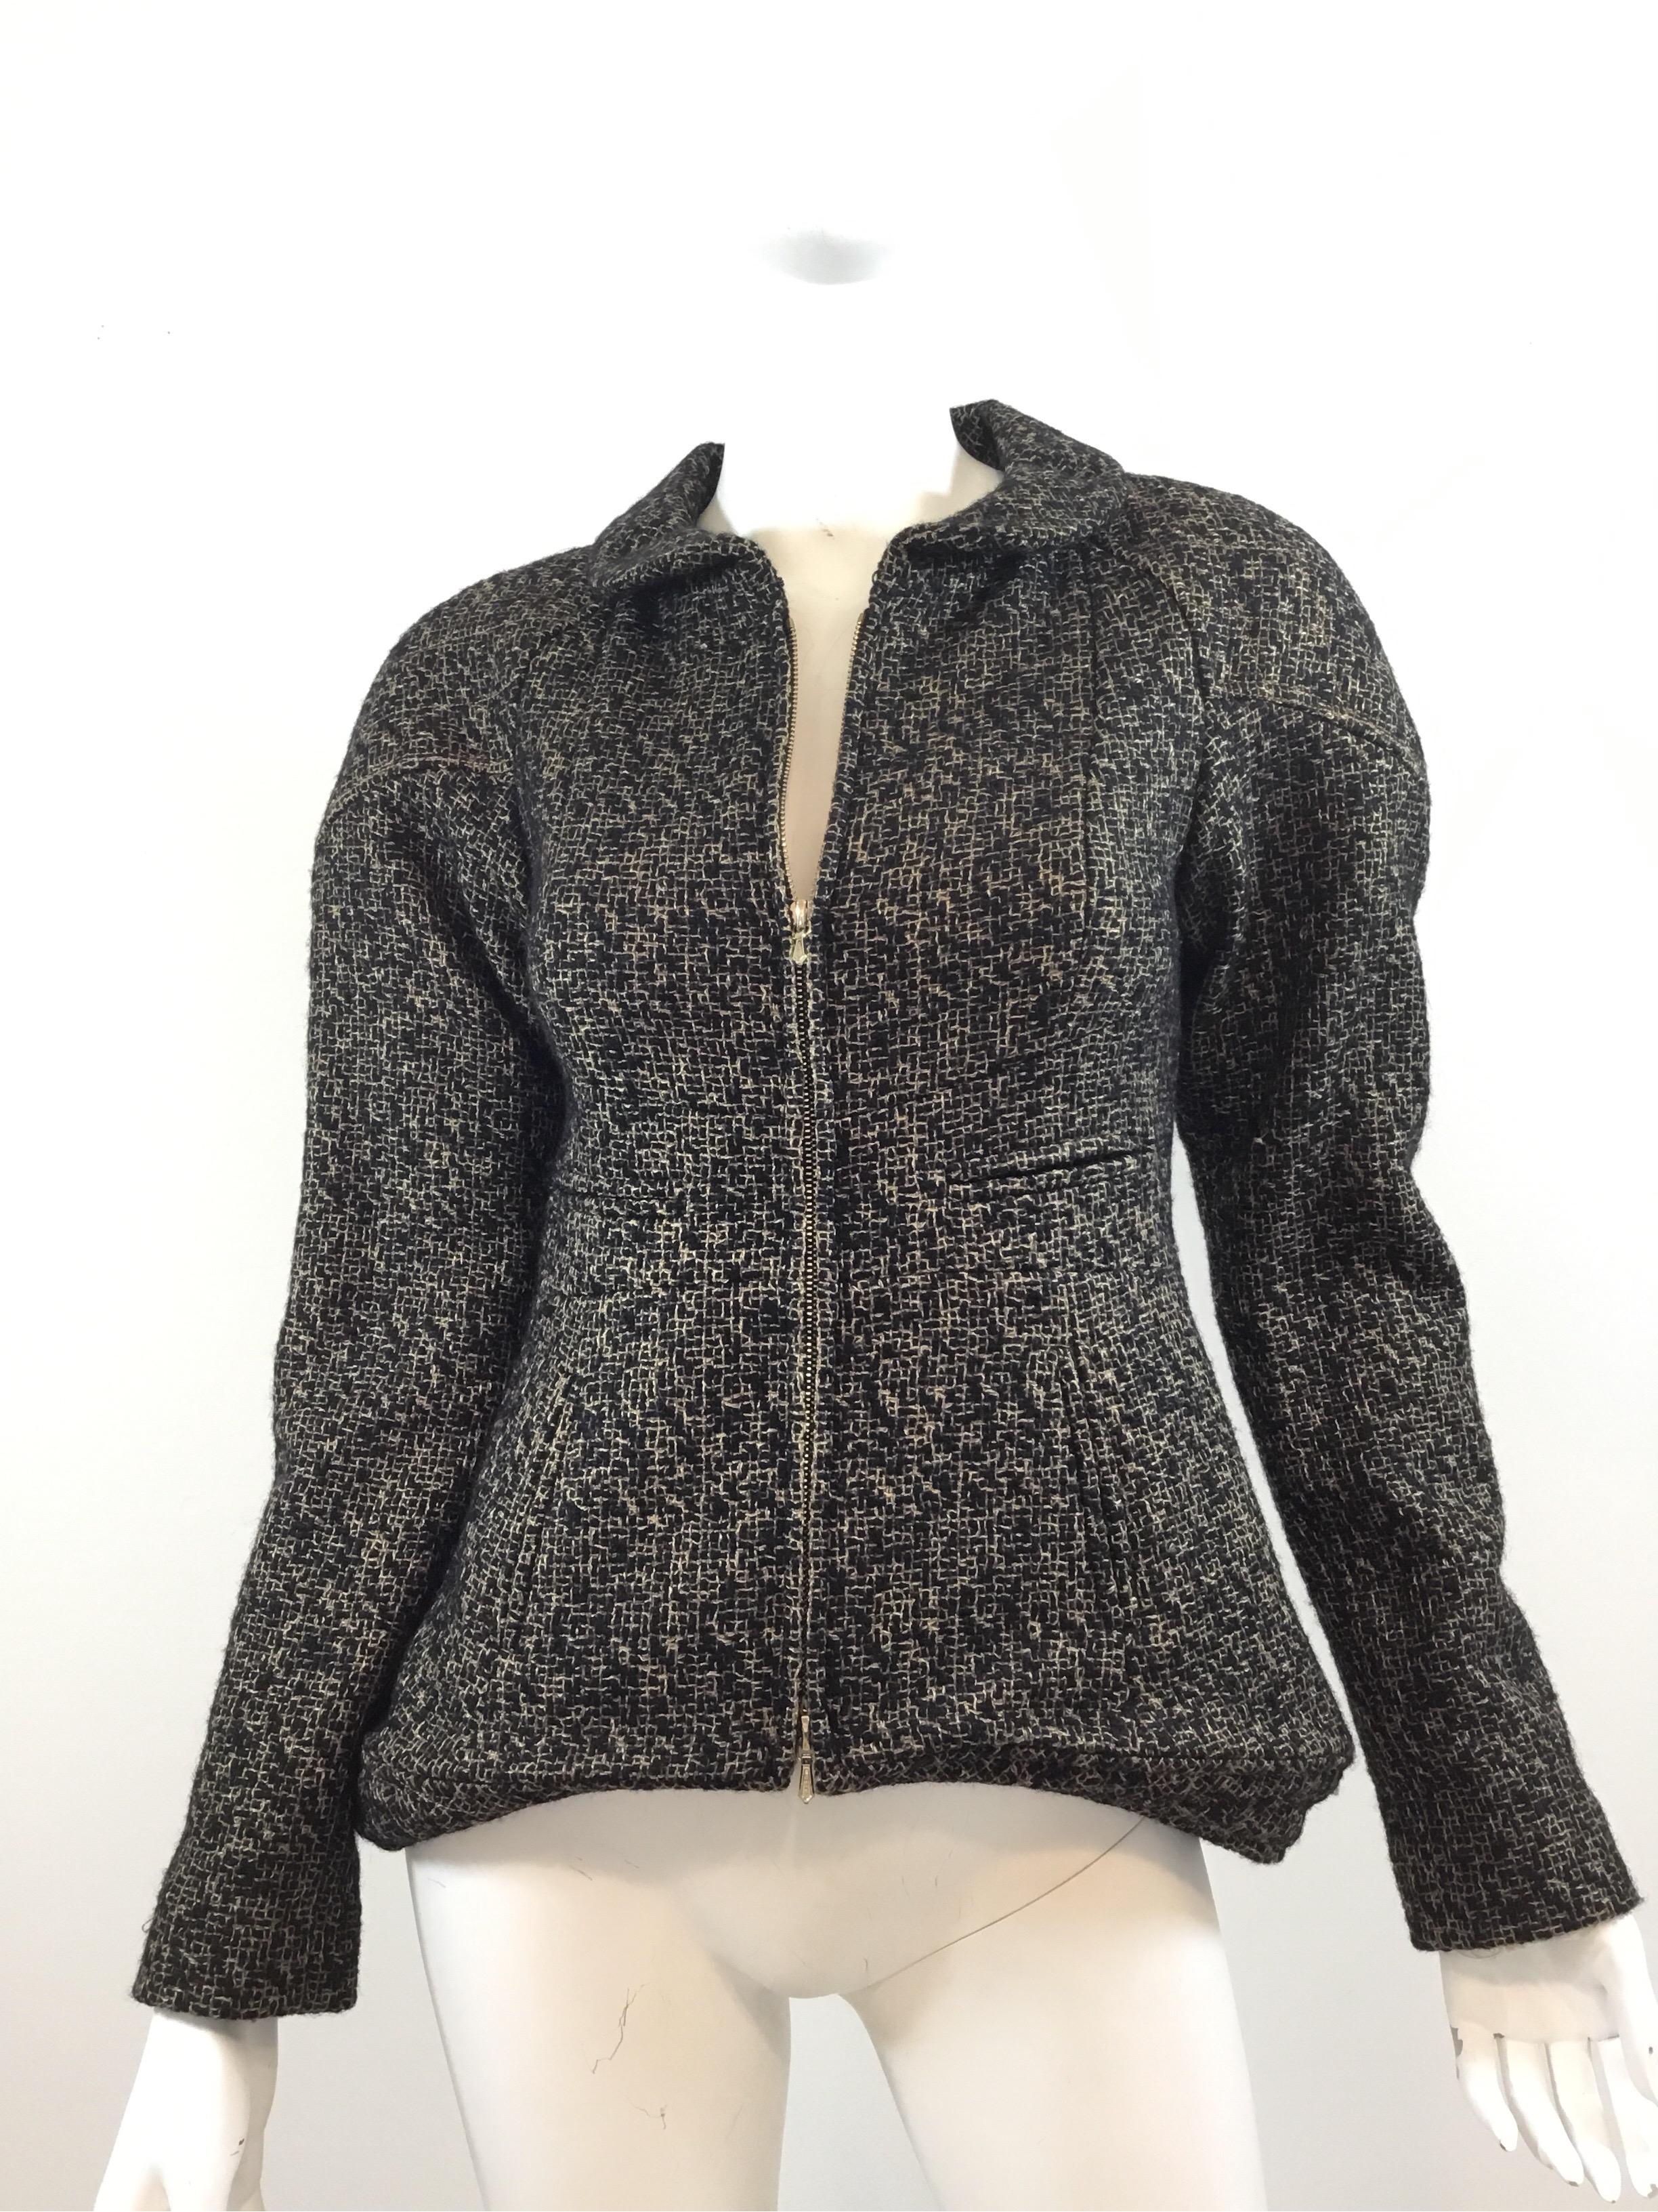 Chanel zip up jacket is featured in a Black and gold colored Tweed knit, Peplum style waist, decorative slit pockets at the front, and goldtone Chanel buttons at the back. Jacket is fully lined in silk, labeled size 34. Made in France. 91% Wool, 9%